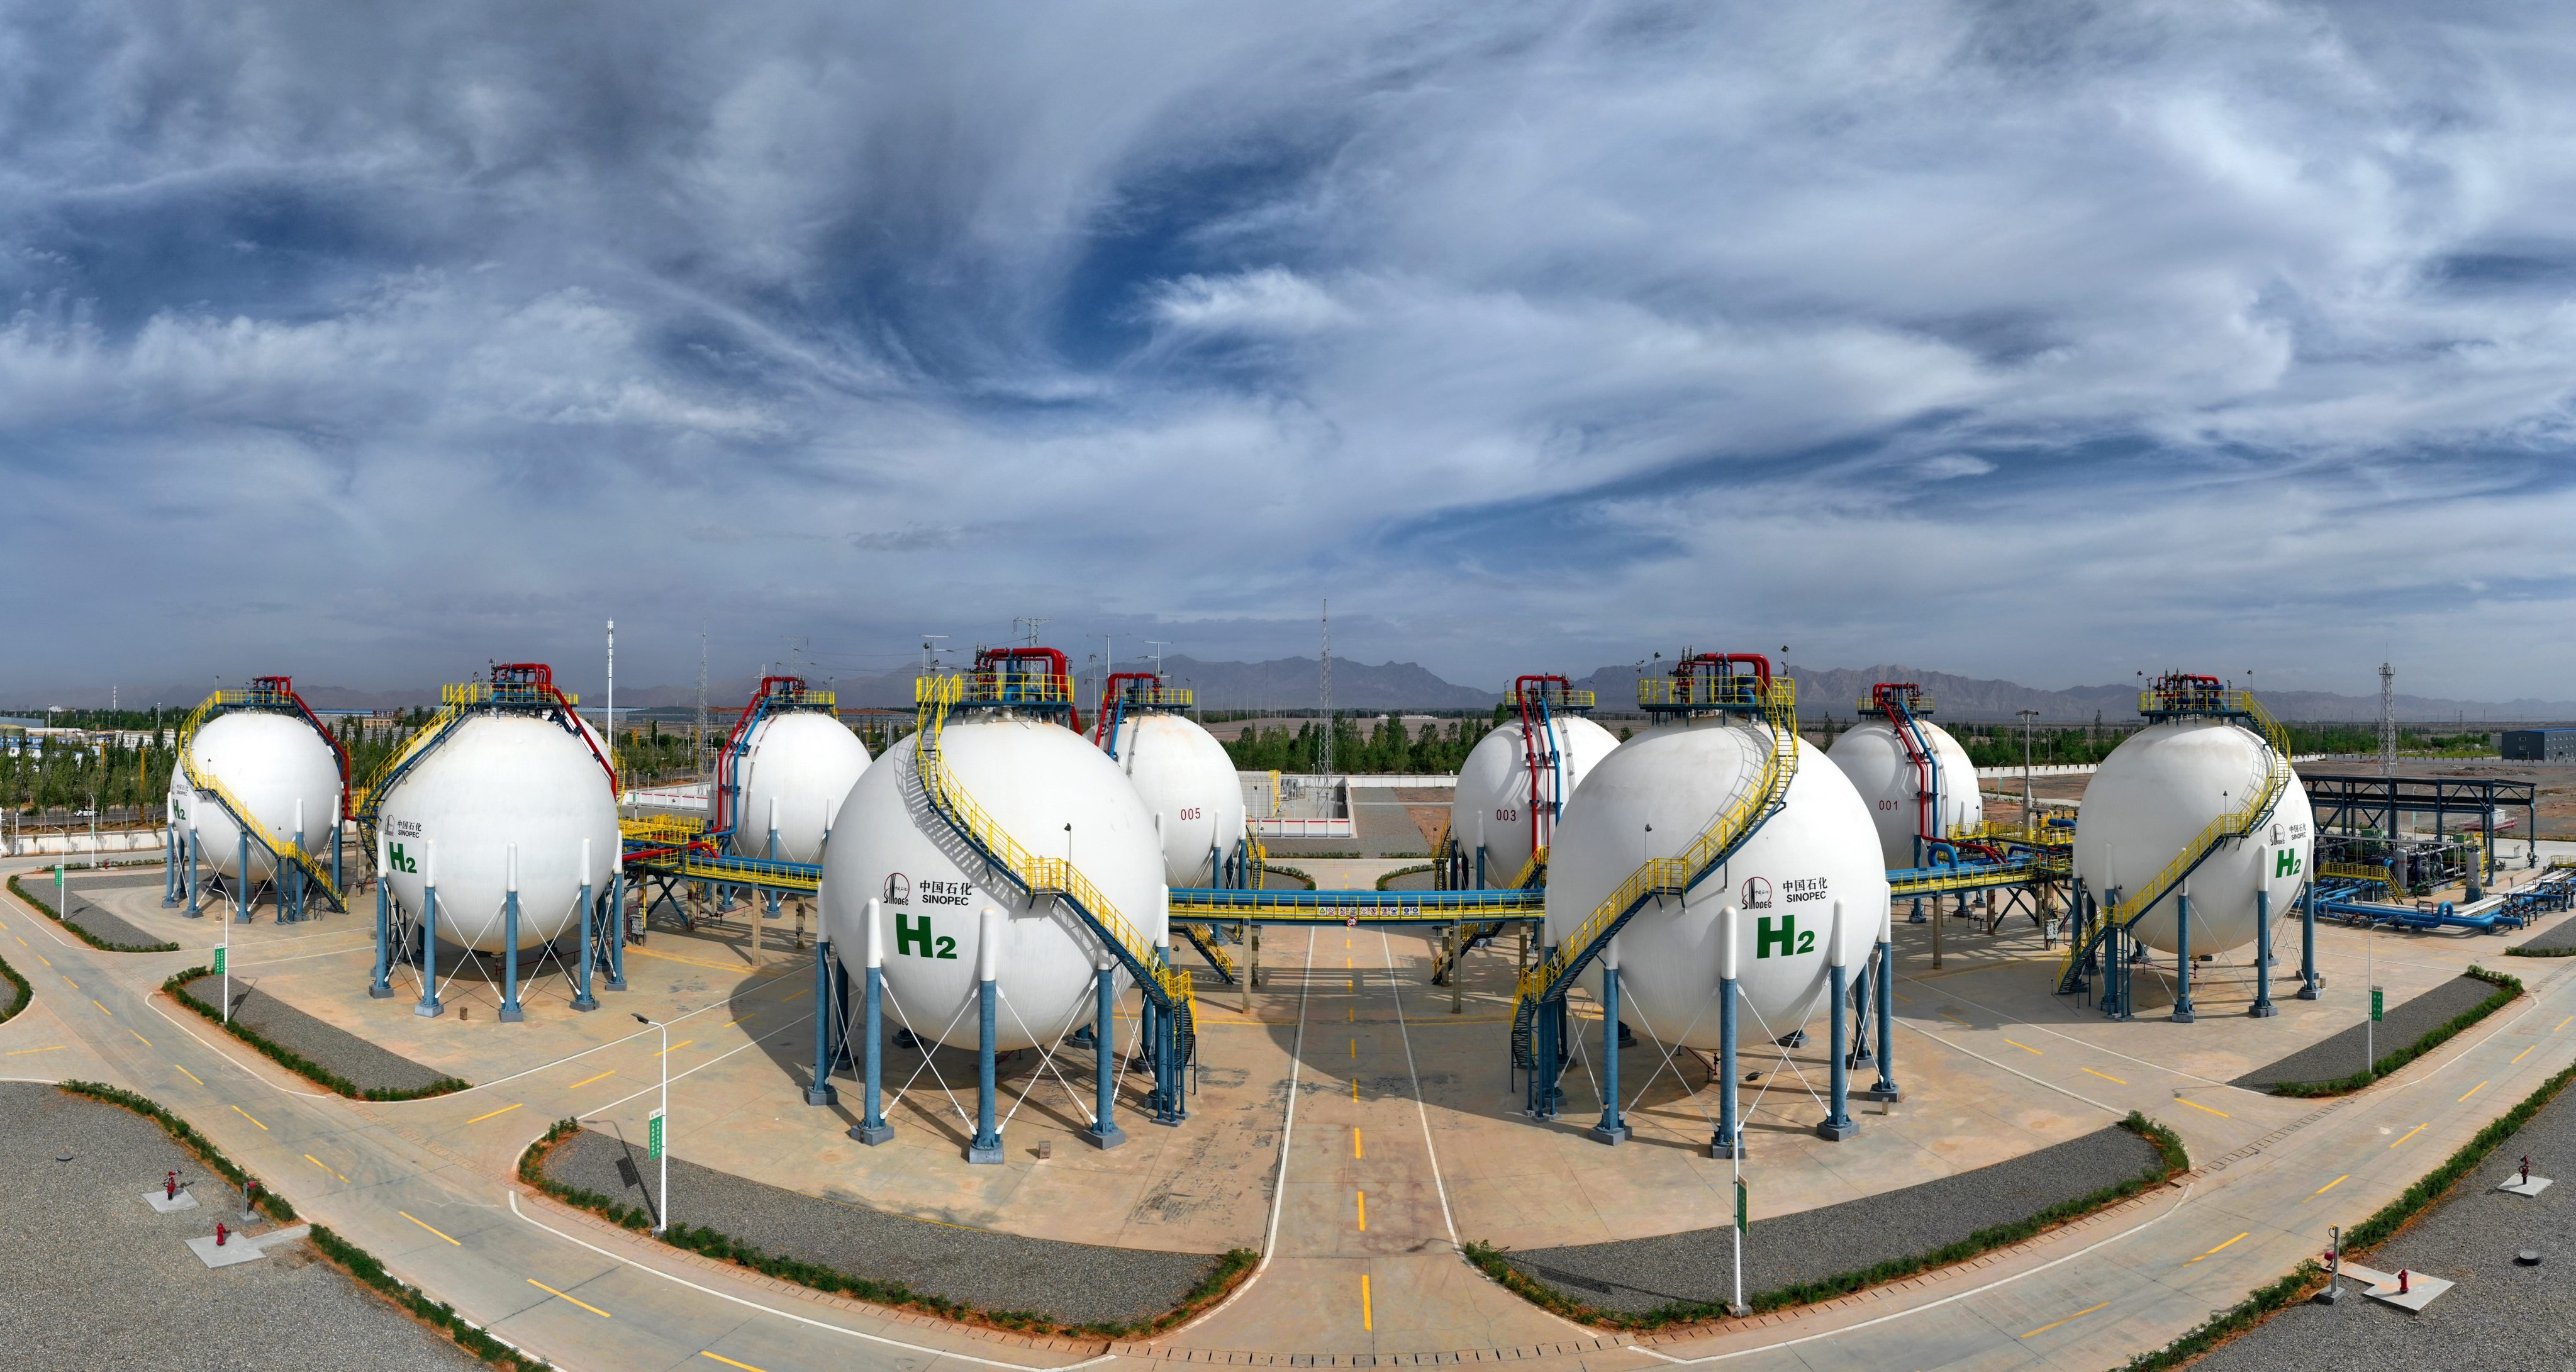 Hydrogen storage tanks at the mega green hydrogen plant in Kuqa, in China’s Xinjiang Uygur autonomous region. Photo: VCG via Getty Images